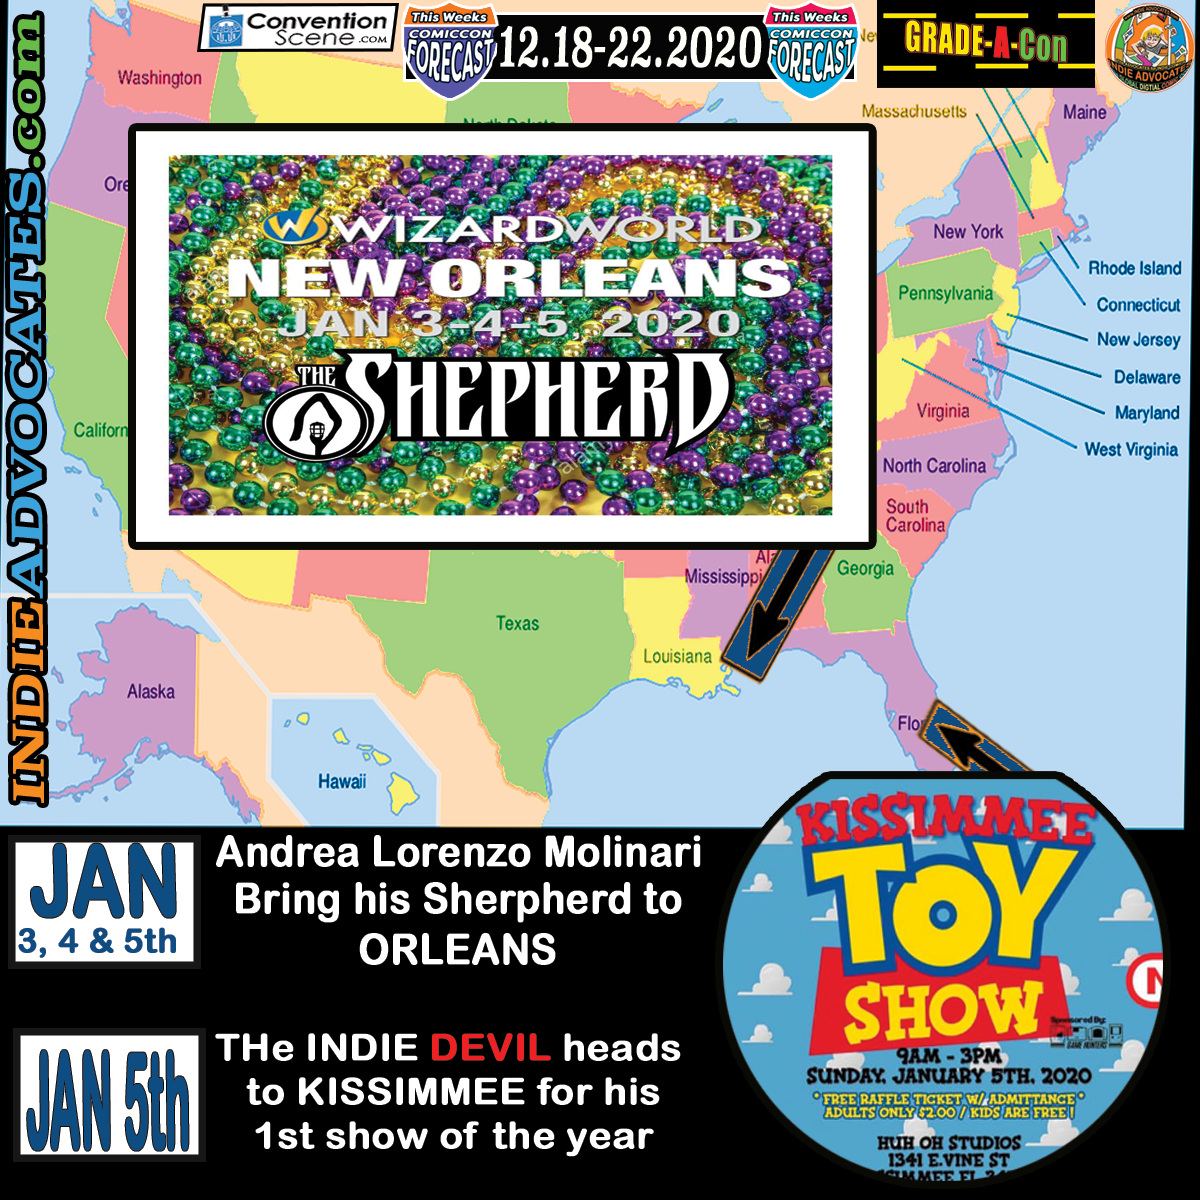 Week 1 of 2020 ComicVentions HIGHWAY EXITS:: [1.2-5] 1st Cons of 2020-Kissimmee Toy Show (FL)-Wizard World NO (LA)-